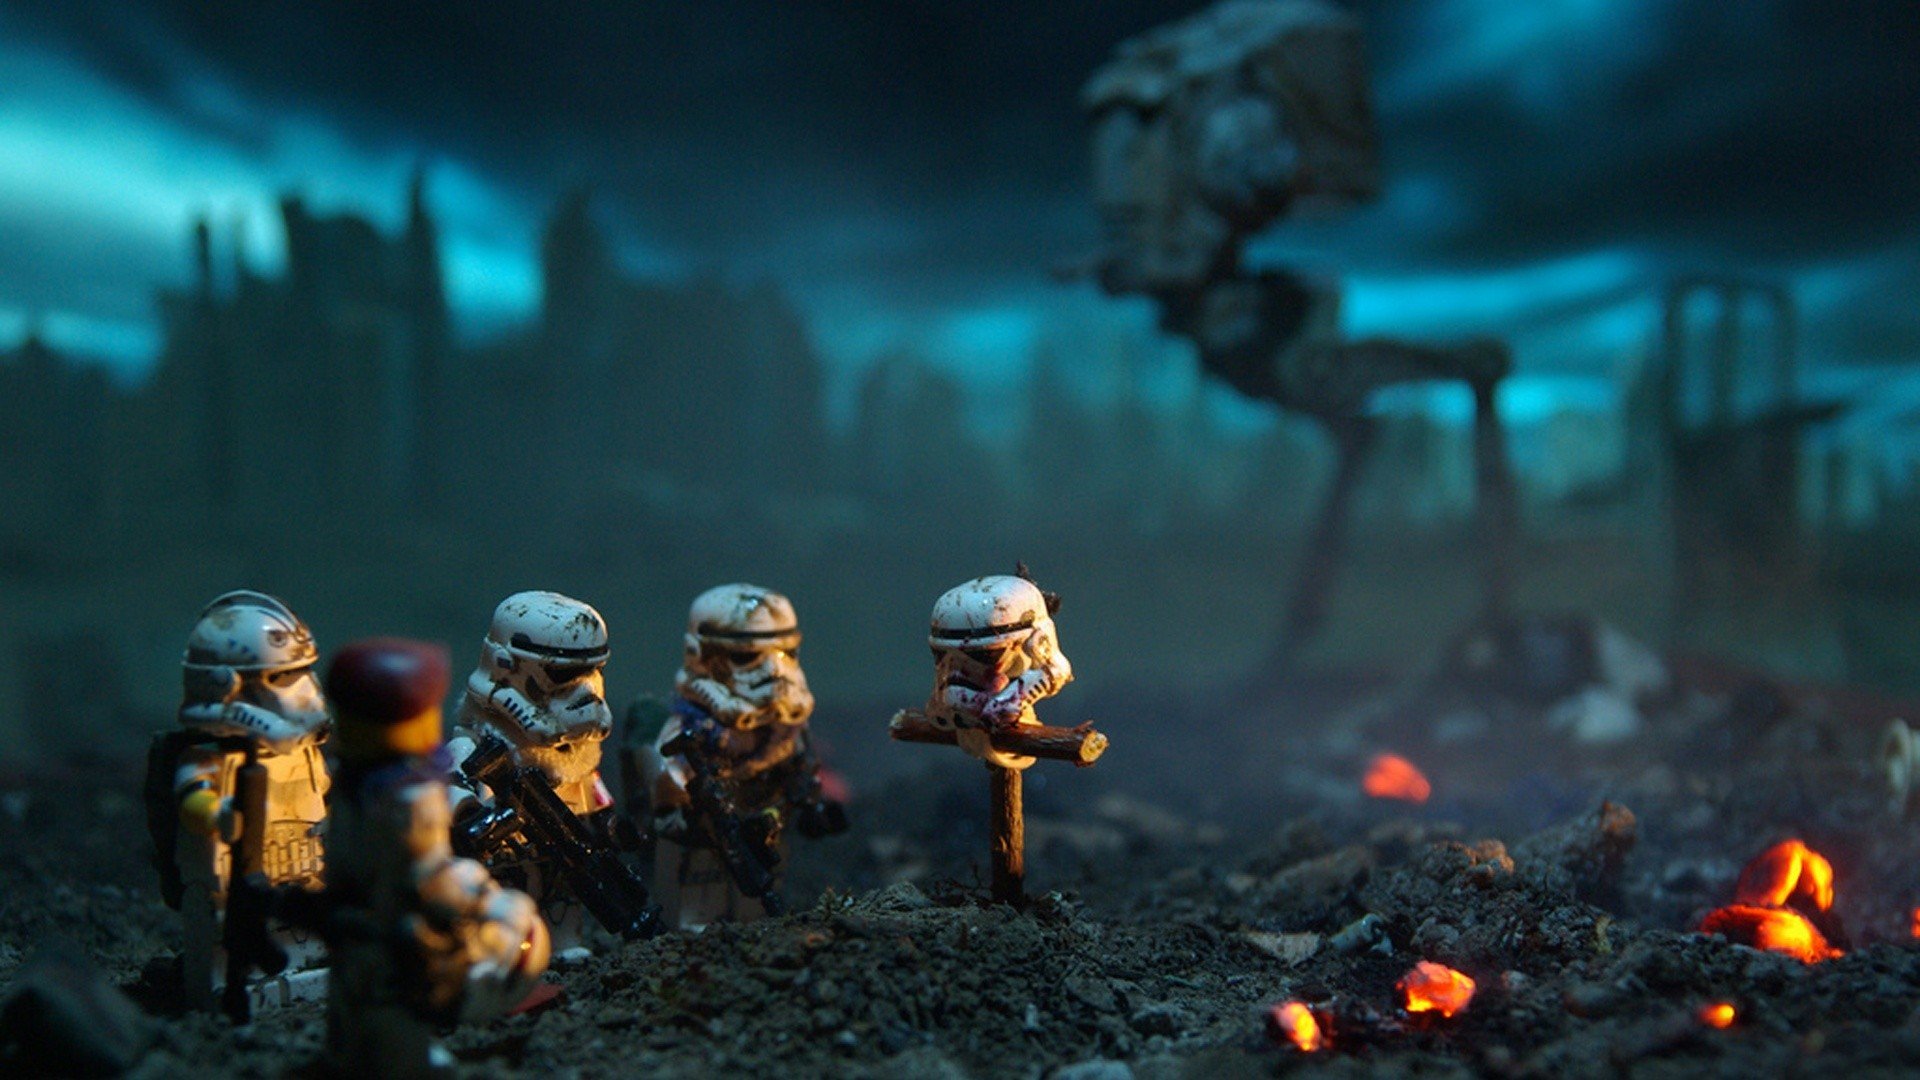 Star Wars Lego Cool Pictures HD Wallpaper Star Wars Lego Cool Pictures